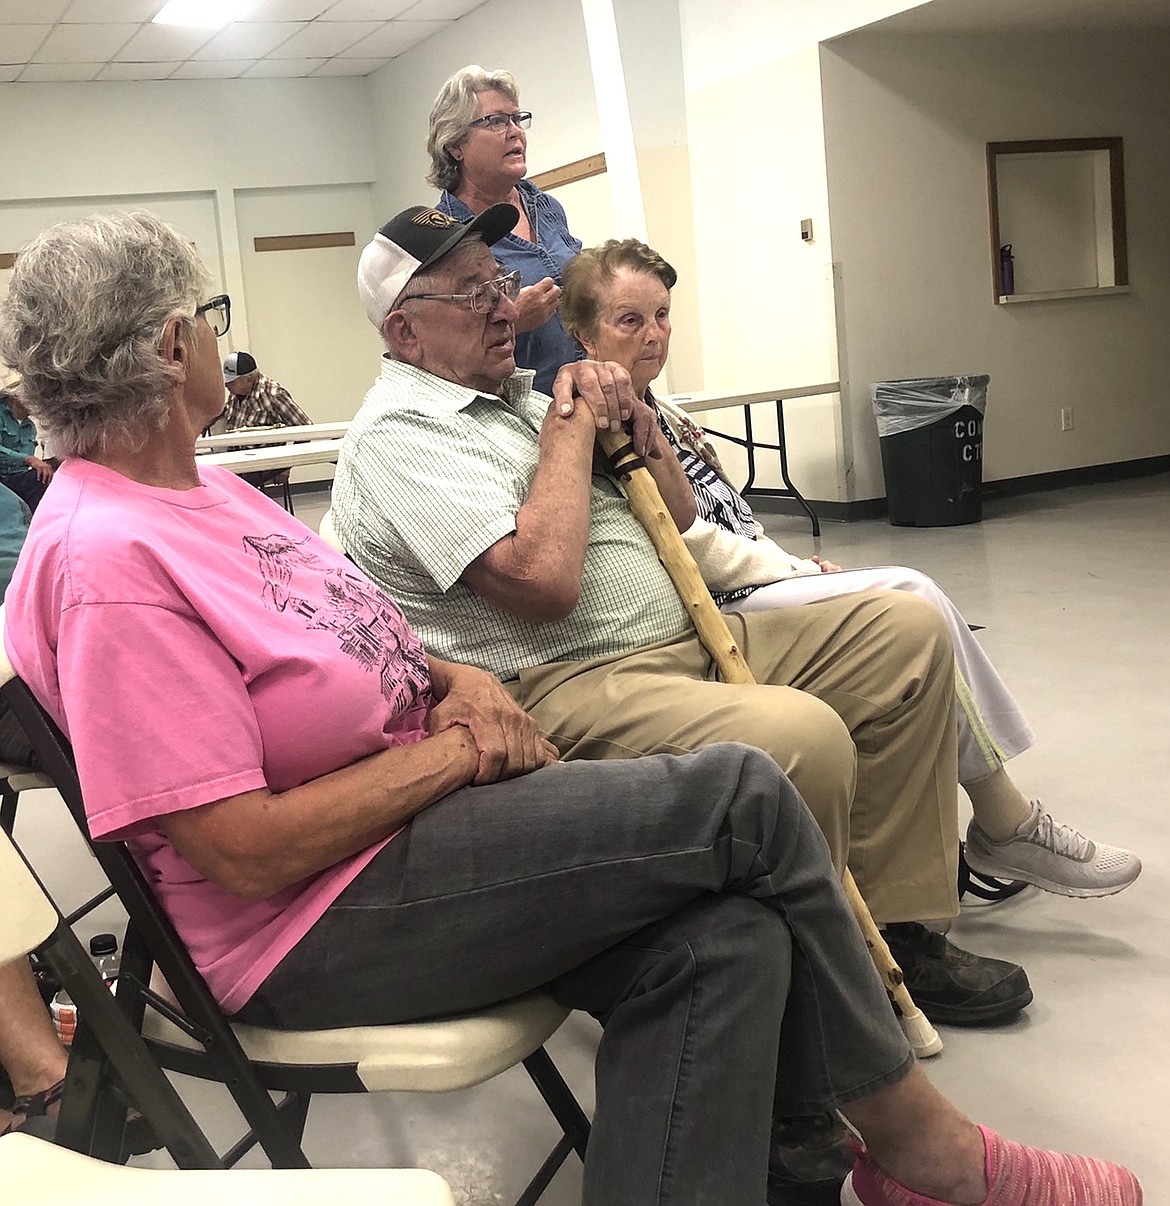 Irrigators gathered in August to protest the Lake County Commissioners decision not to collect fees for the Flathead Indian Irrigation Project.